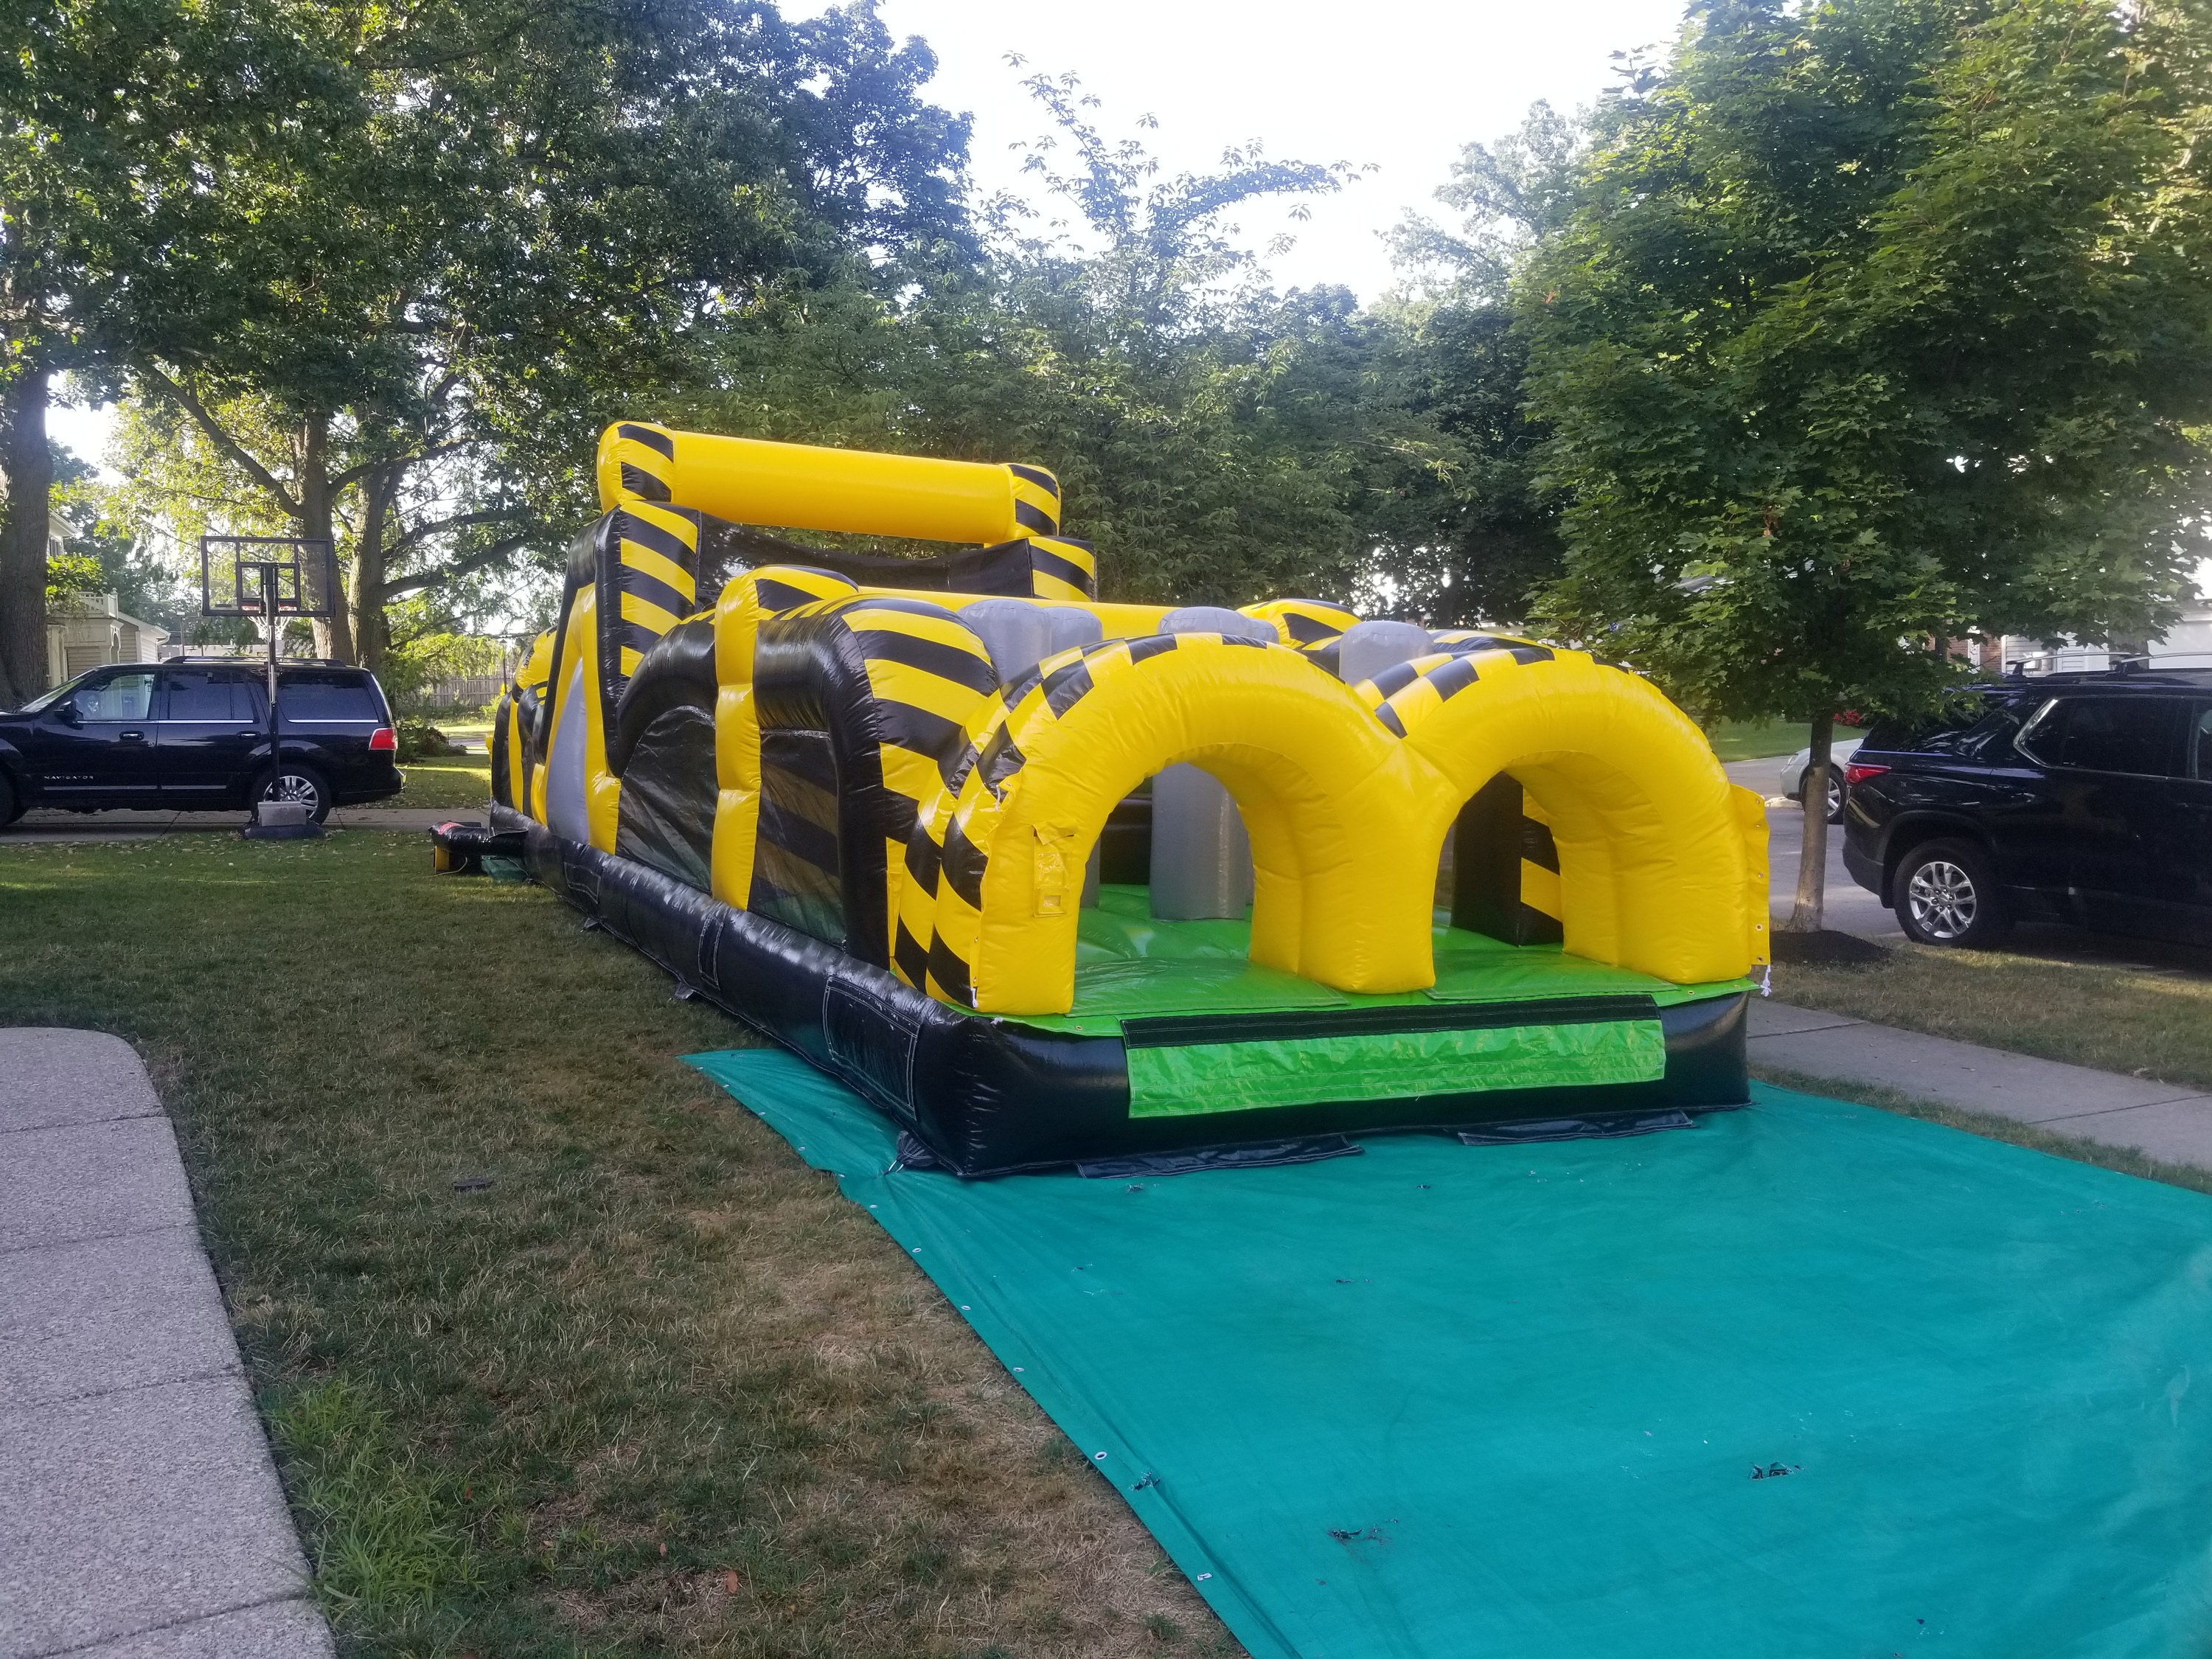 40 foot long yellow obstacle course set up on the front yard of a town of Tonawanda home